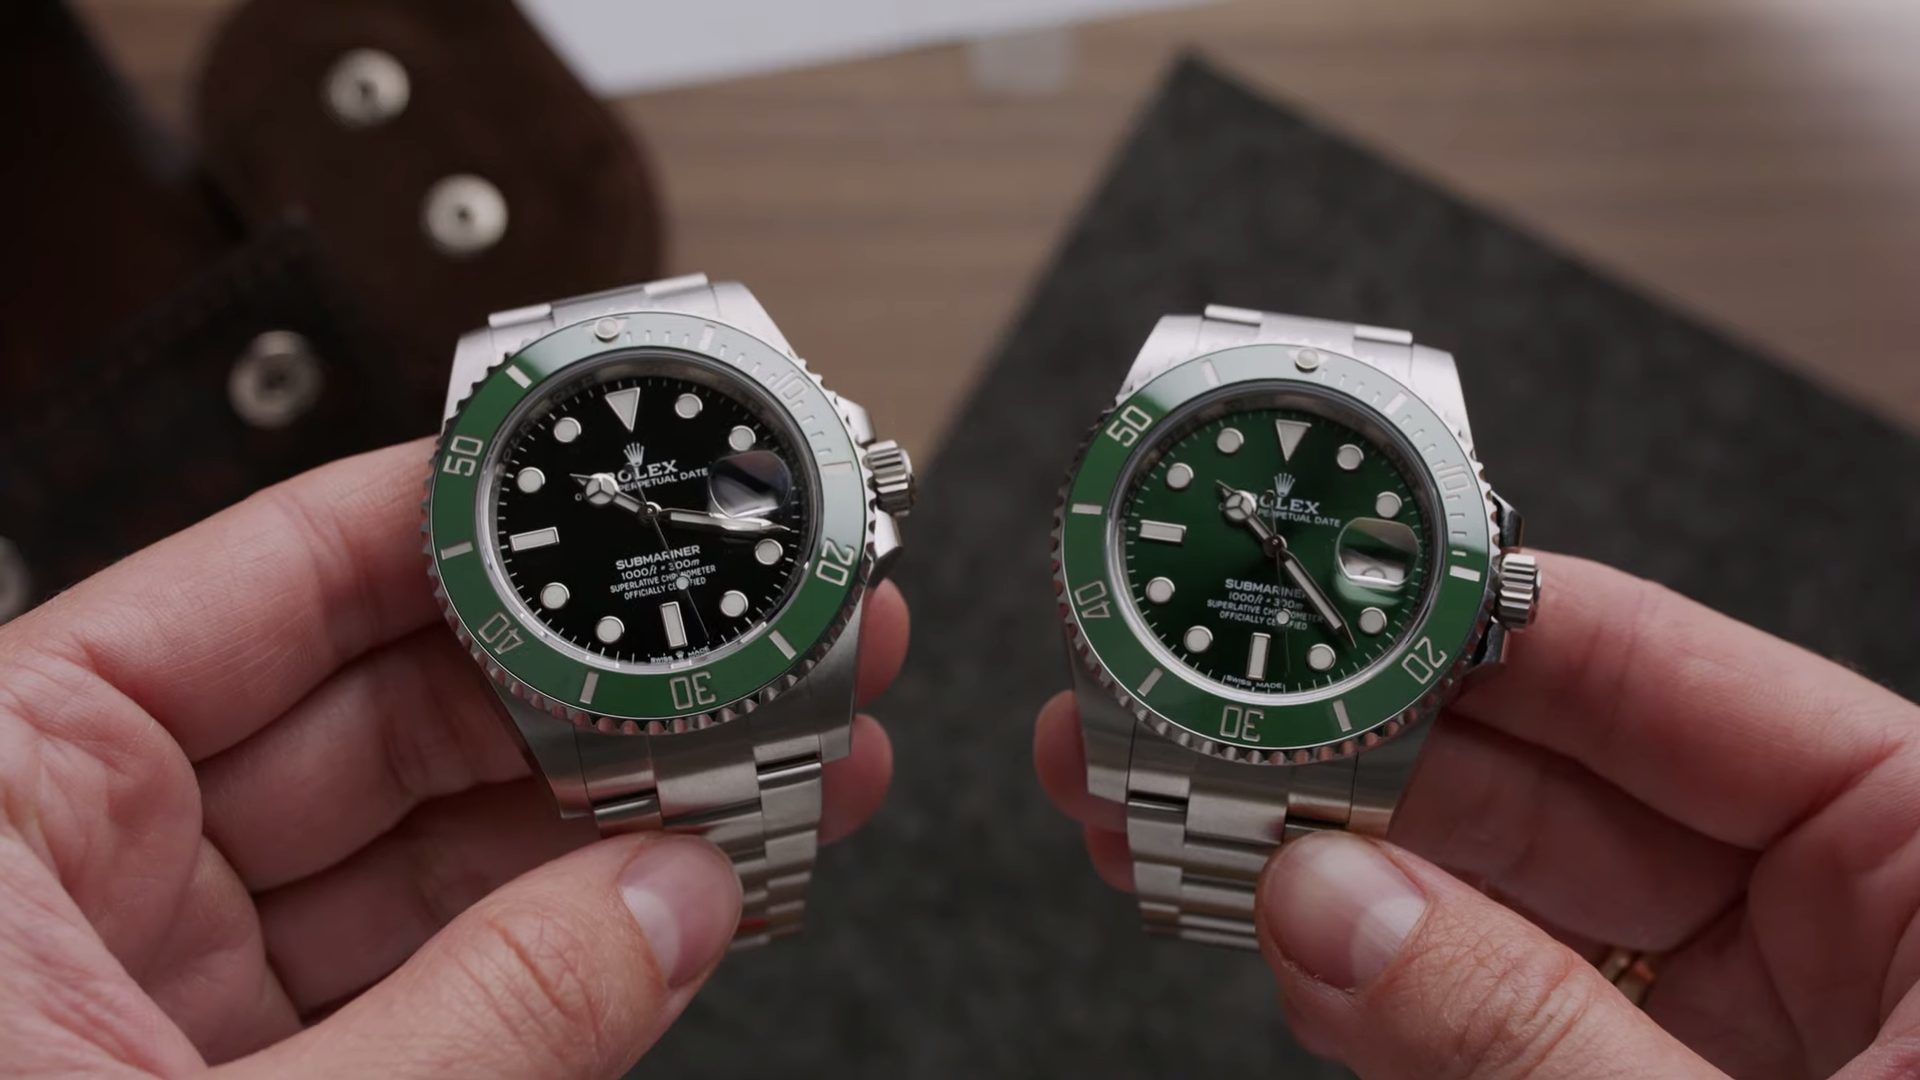 The Rolex Submariner In 2020: What's Actually Changed?